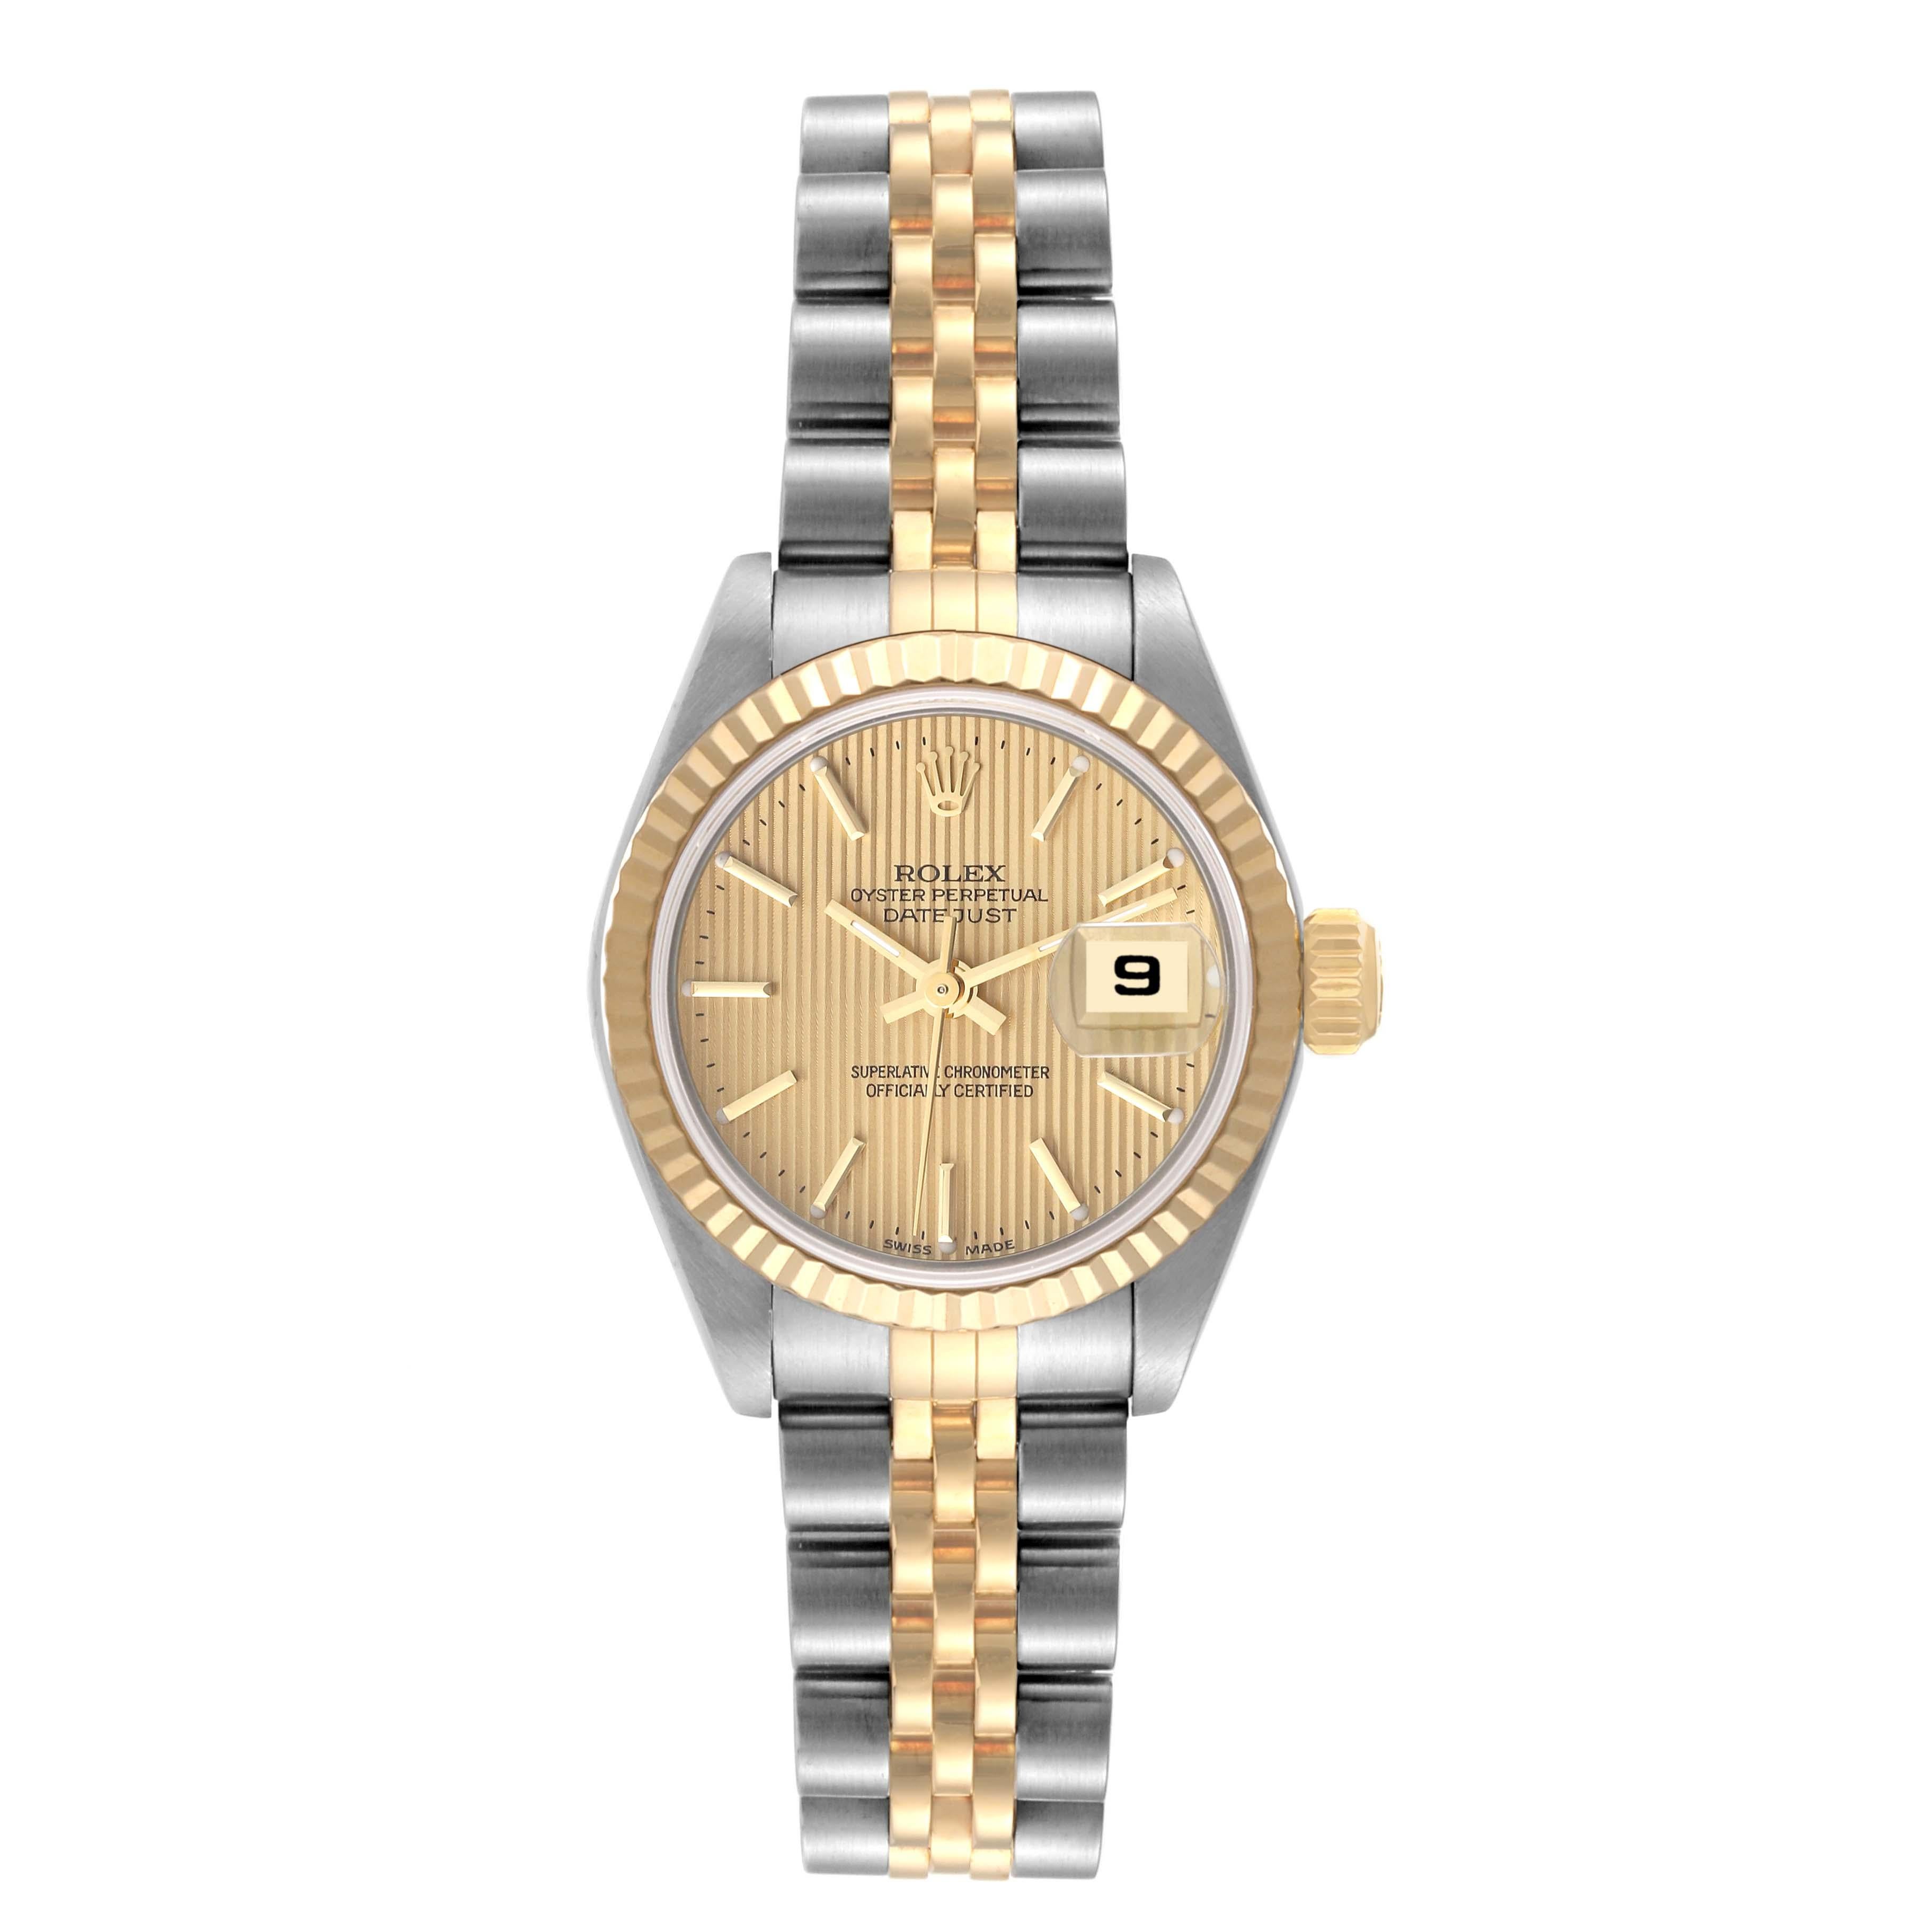 Rolex Datejust Steel Yellow Gold Tapestry Dial Ladies Watch 79173 Box Papers. Officially certified chronometer automatic self-winding movement. Stainless steel oyster case 26 mm in diameter. Rolex logo on an 18K yellow gold crown. 18k yellow gold